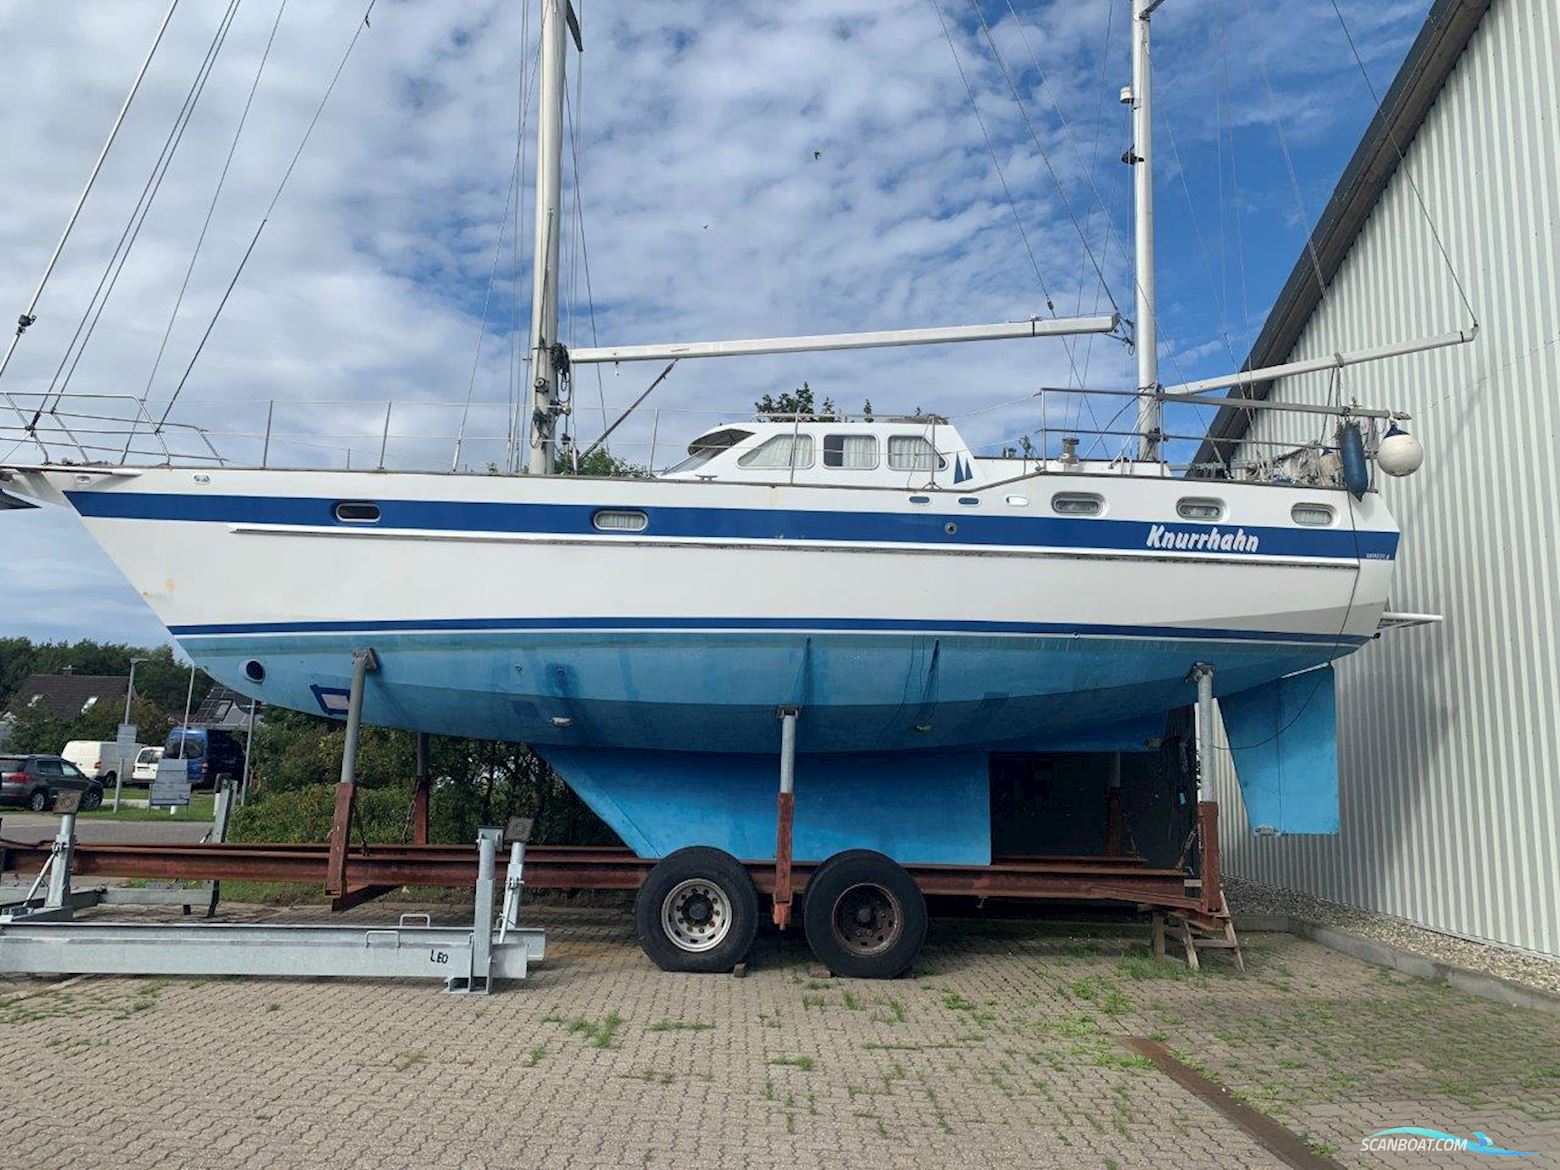 Motiva 43 Sailing boat 1987, with Ford Lehmann engine, Germany